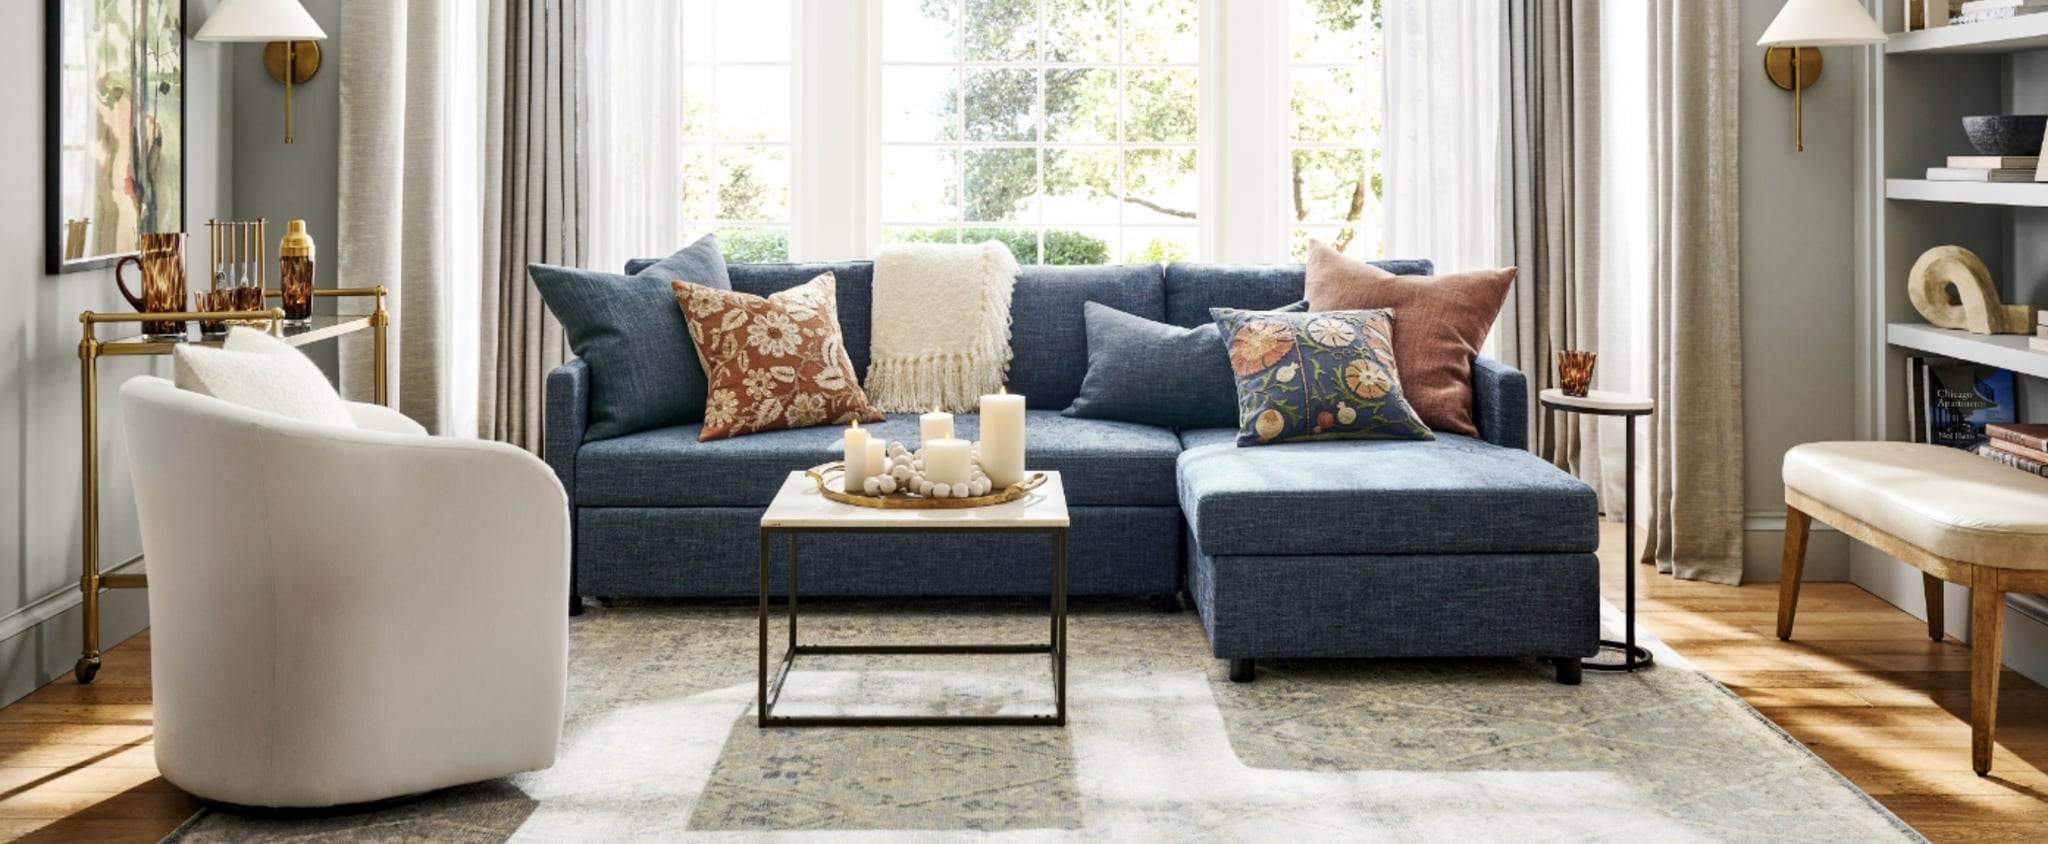 Best Sectional Sofas For Style and Comfort